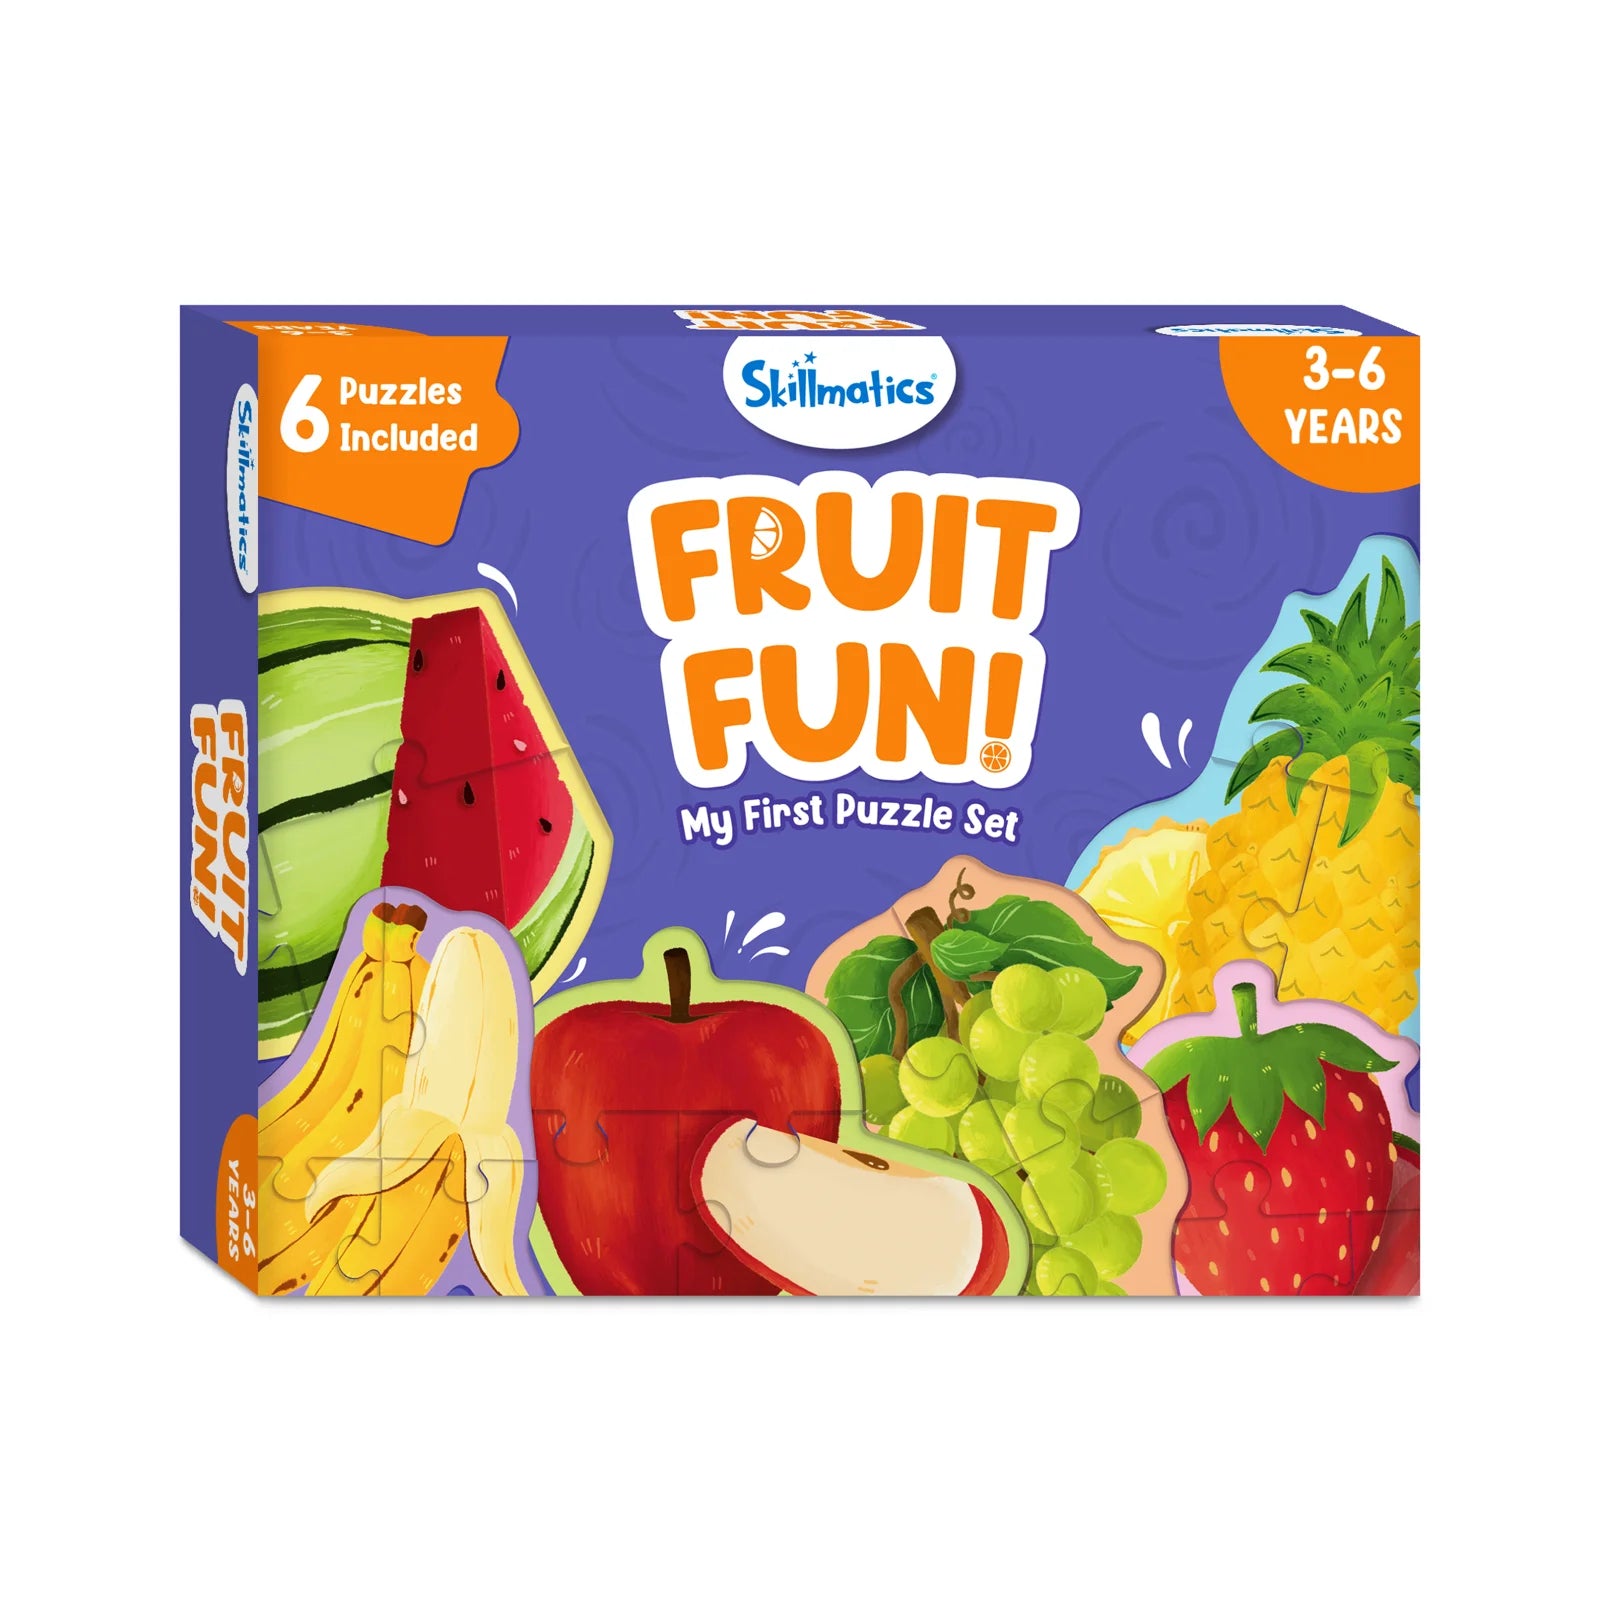 My First Puzzle Set: Fruit Fun (ages 3-6)